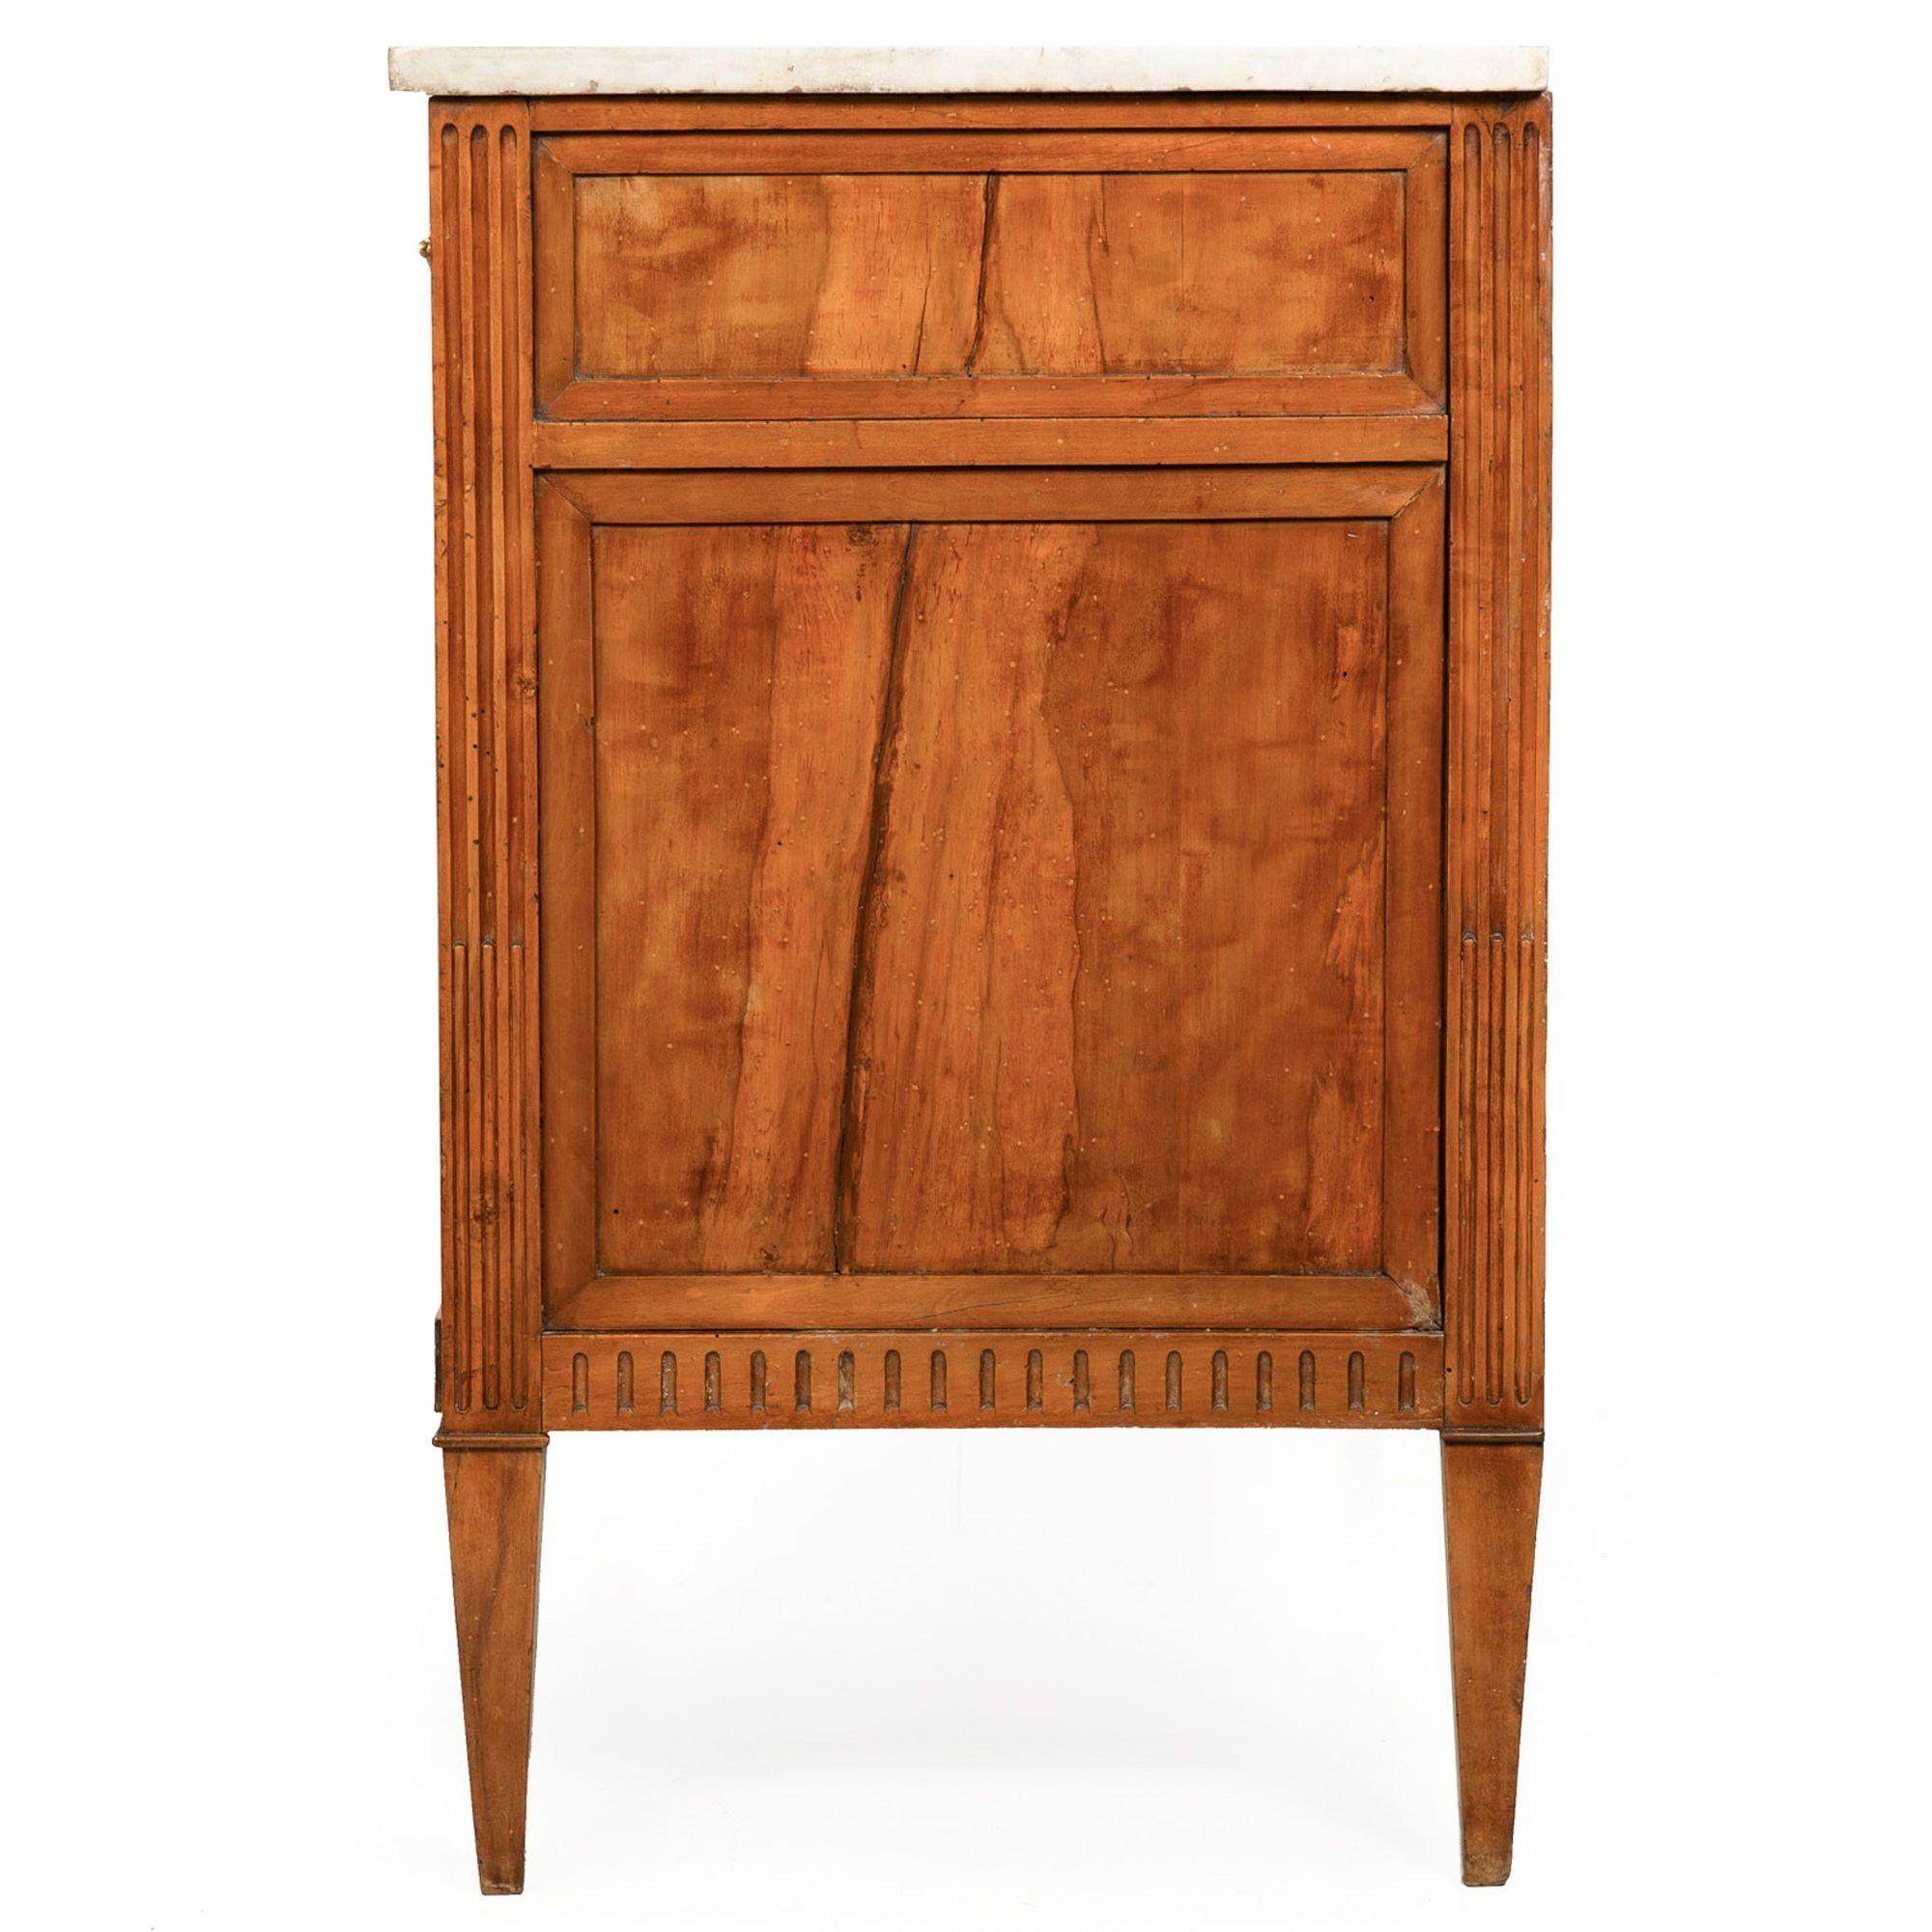 French Neoclassical Provincial Chest of Drawers Commode circa 1800 In Good Condition For Sale In Shippensburg, PA